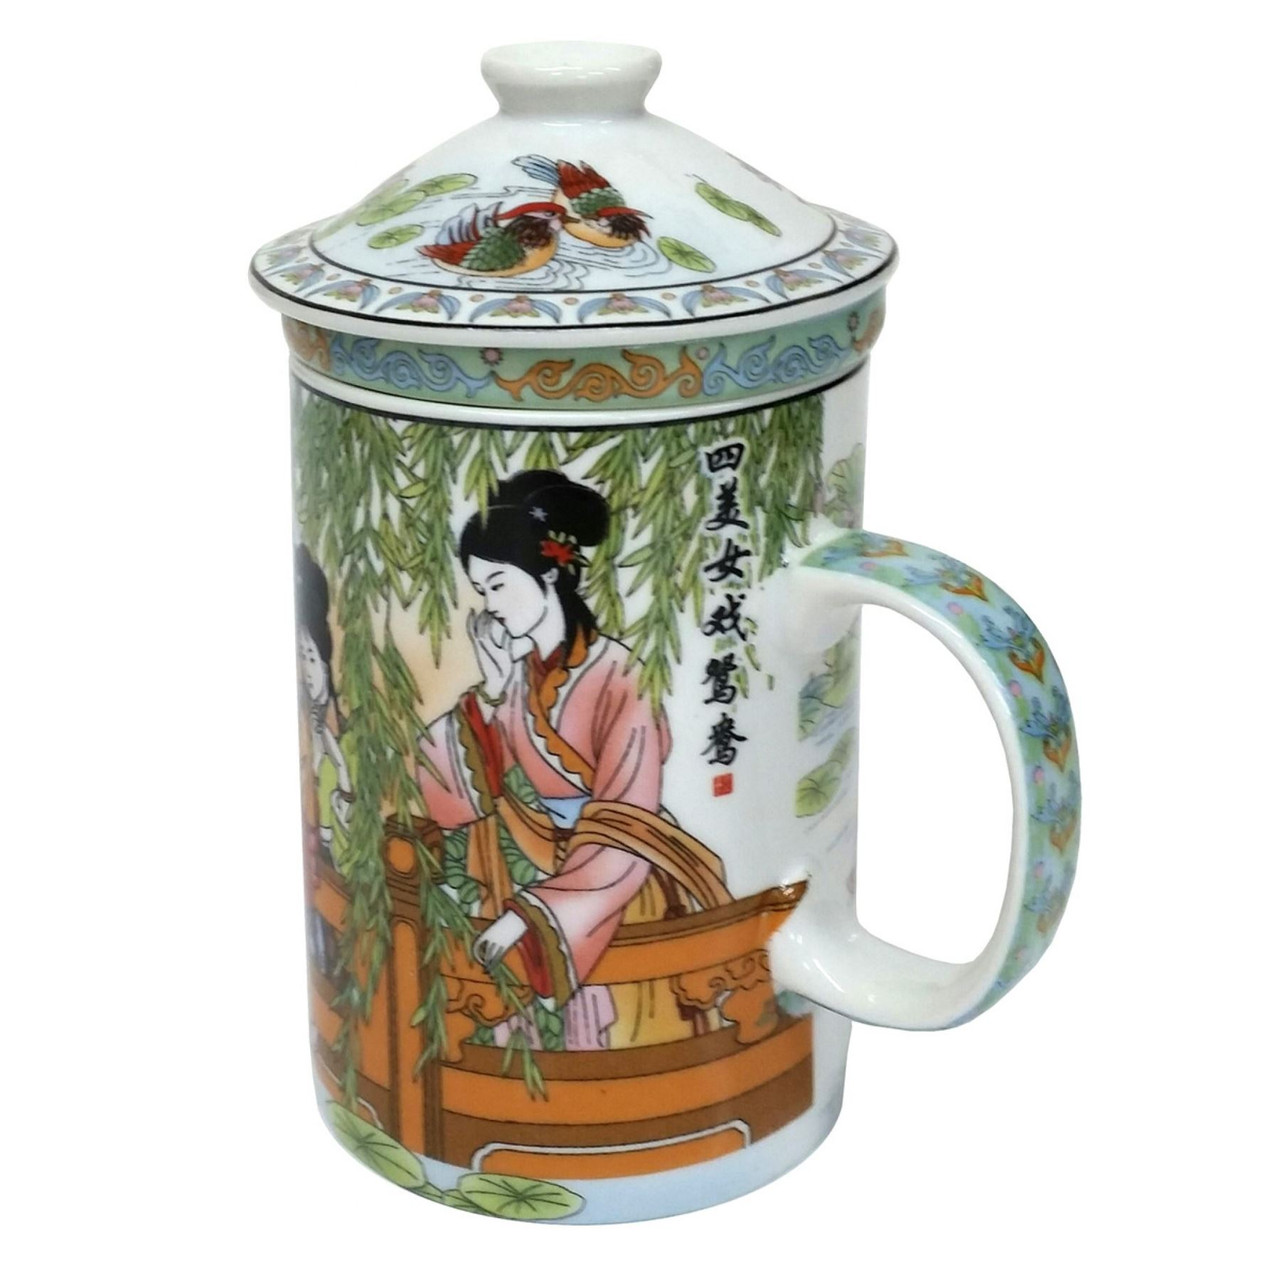 Porcelain Chinese Tea Mug with Infuser and Lid - Ladies in Garden Pattern